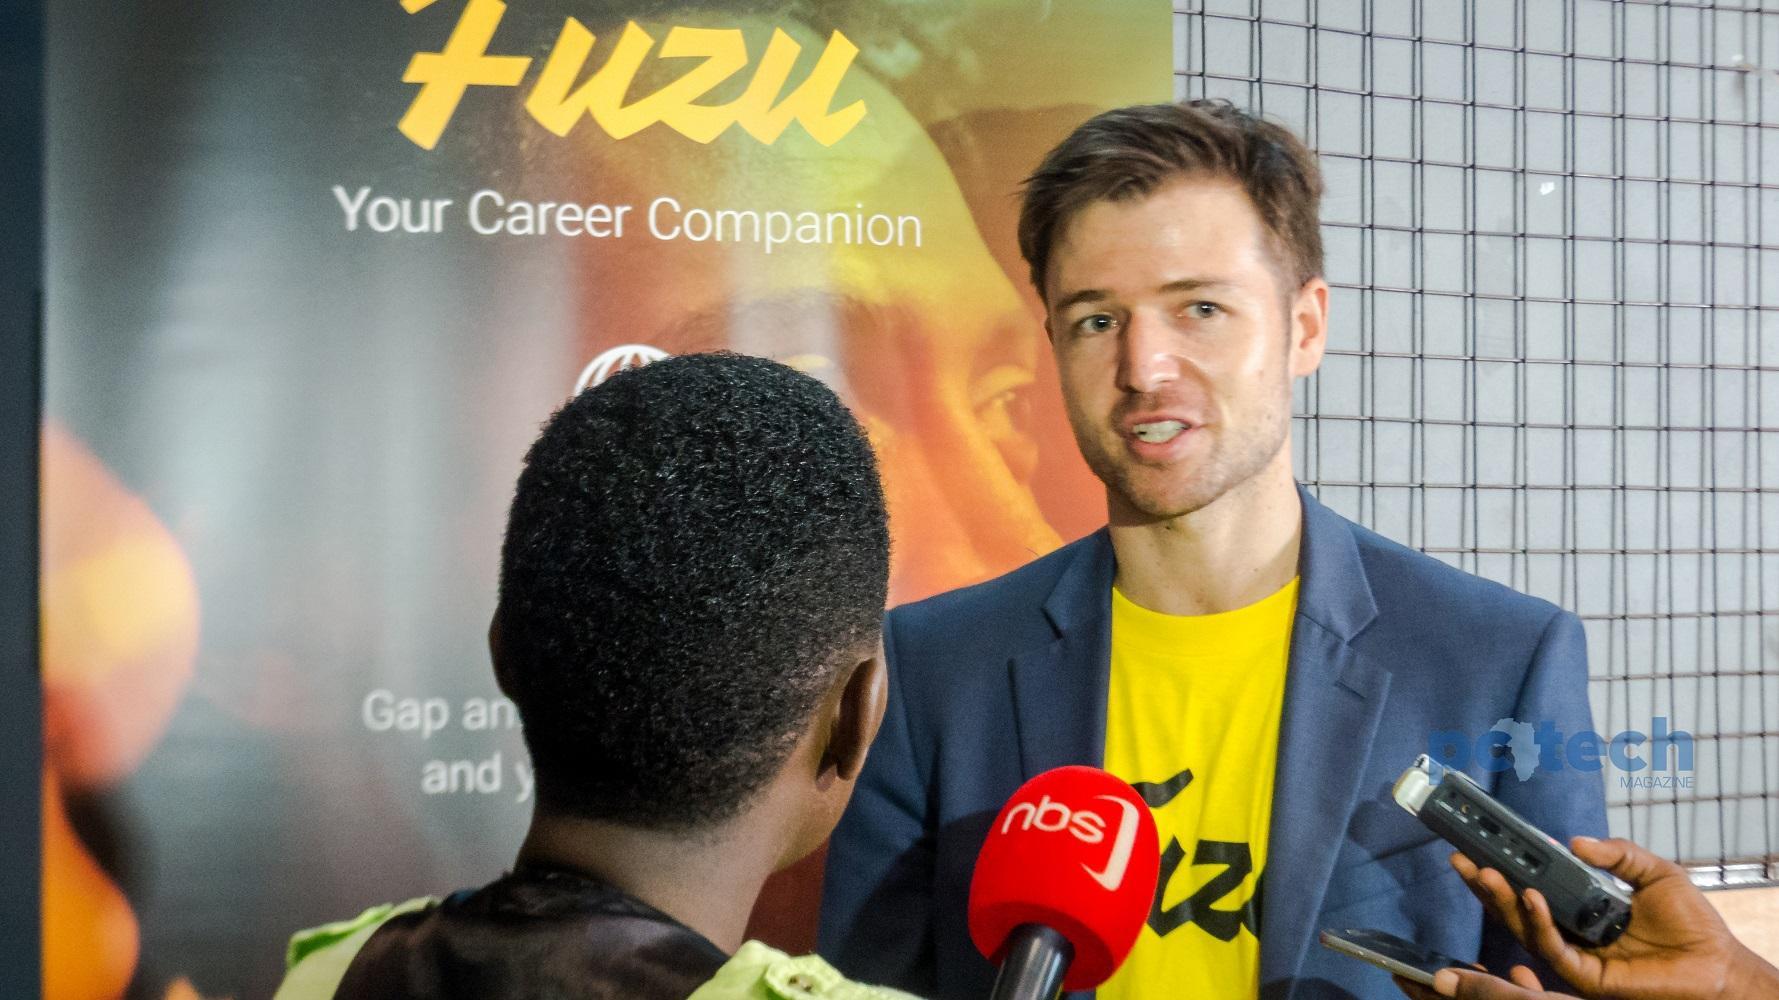 Edward Vaisberg - FUZU Chief Operating Officer talking to press after the launch of its platform in Uganda on Thursday 17th, May 2018. Photographer: Olupot Nathan Ernest/PC TECH MAGAZINE